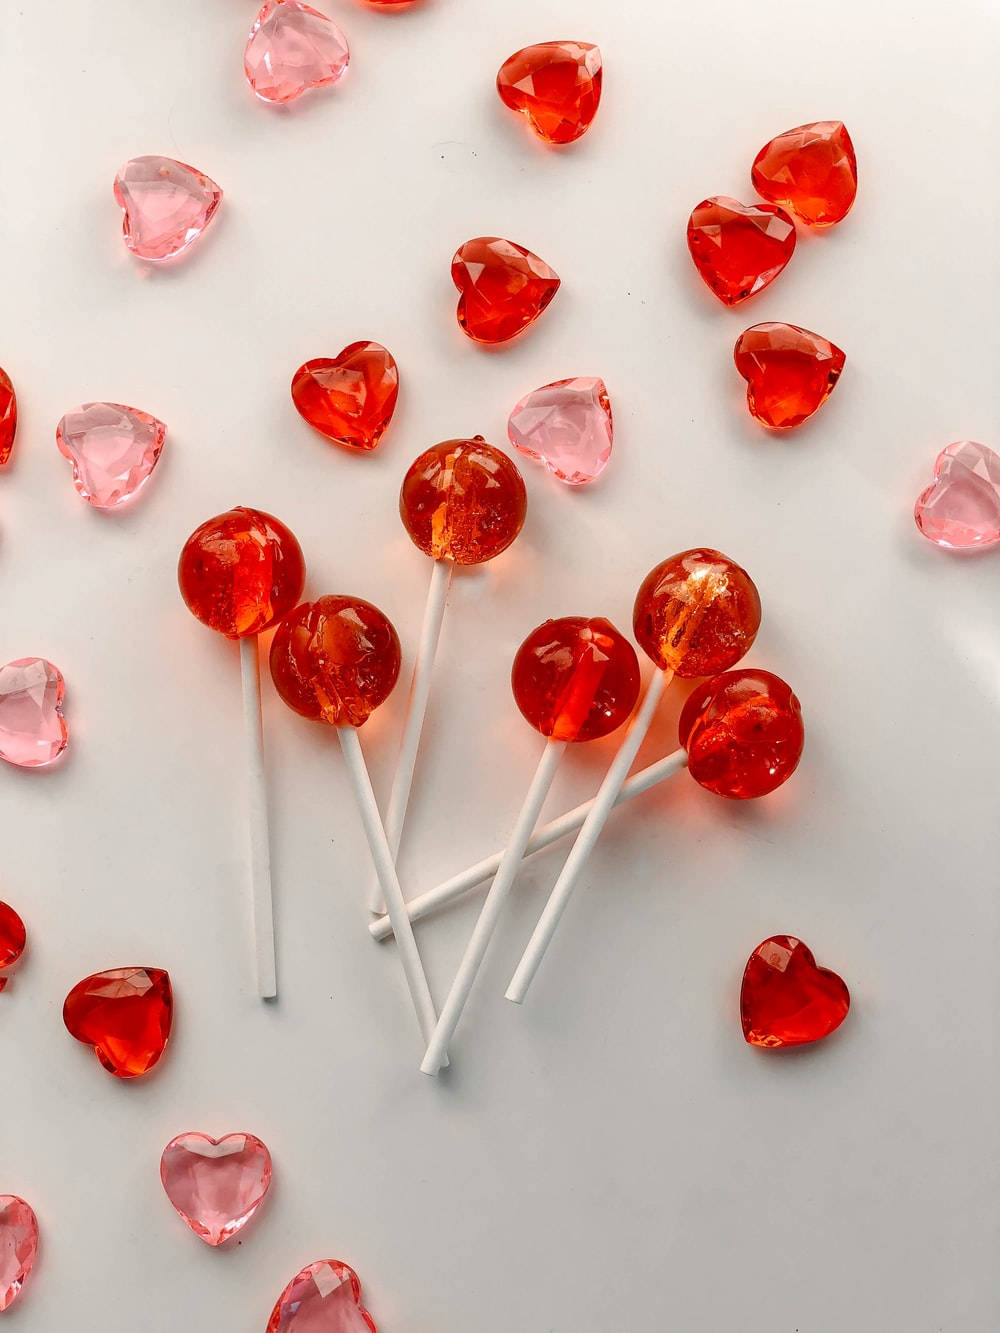 Heart Aesthetic Crystals And Lollipops